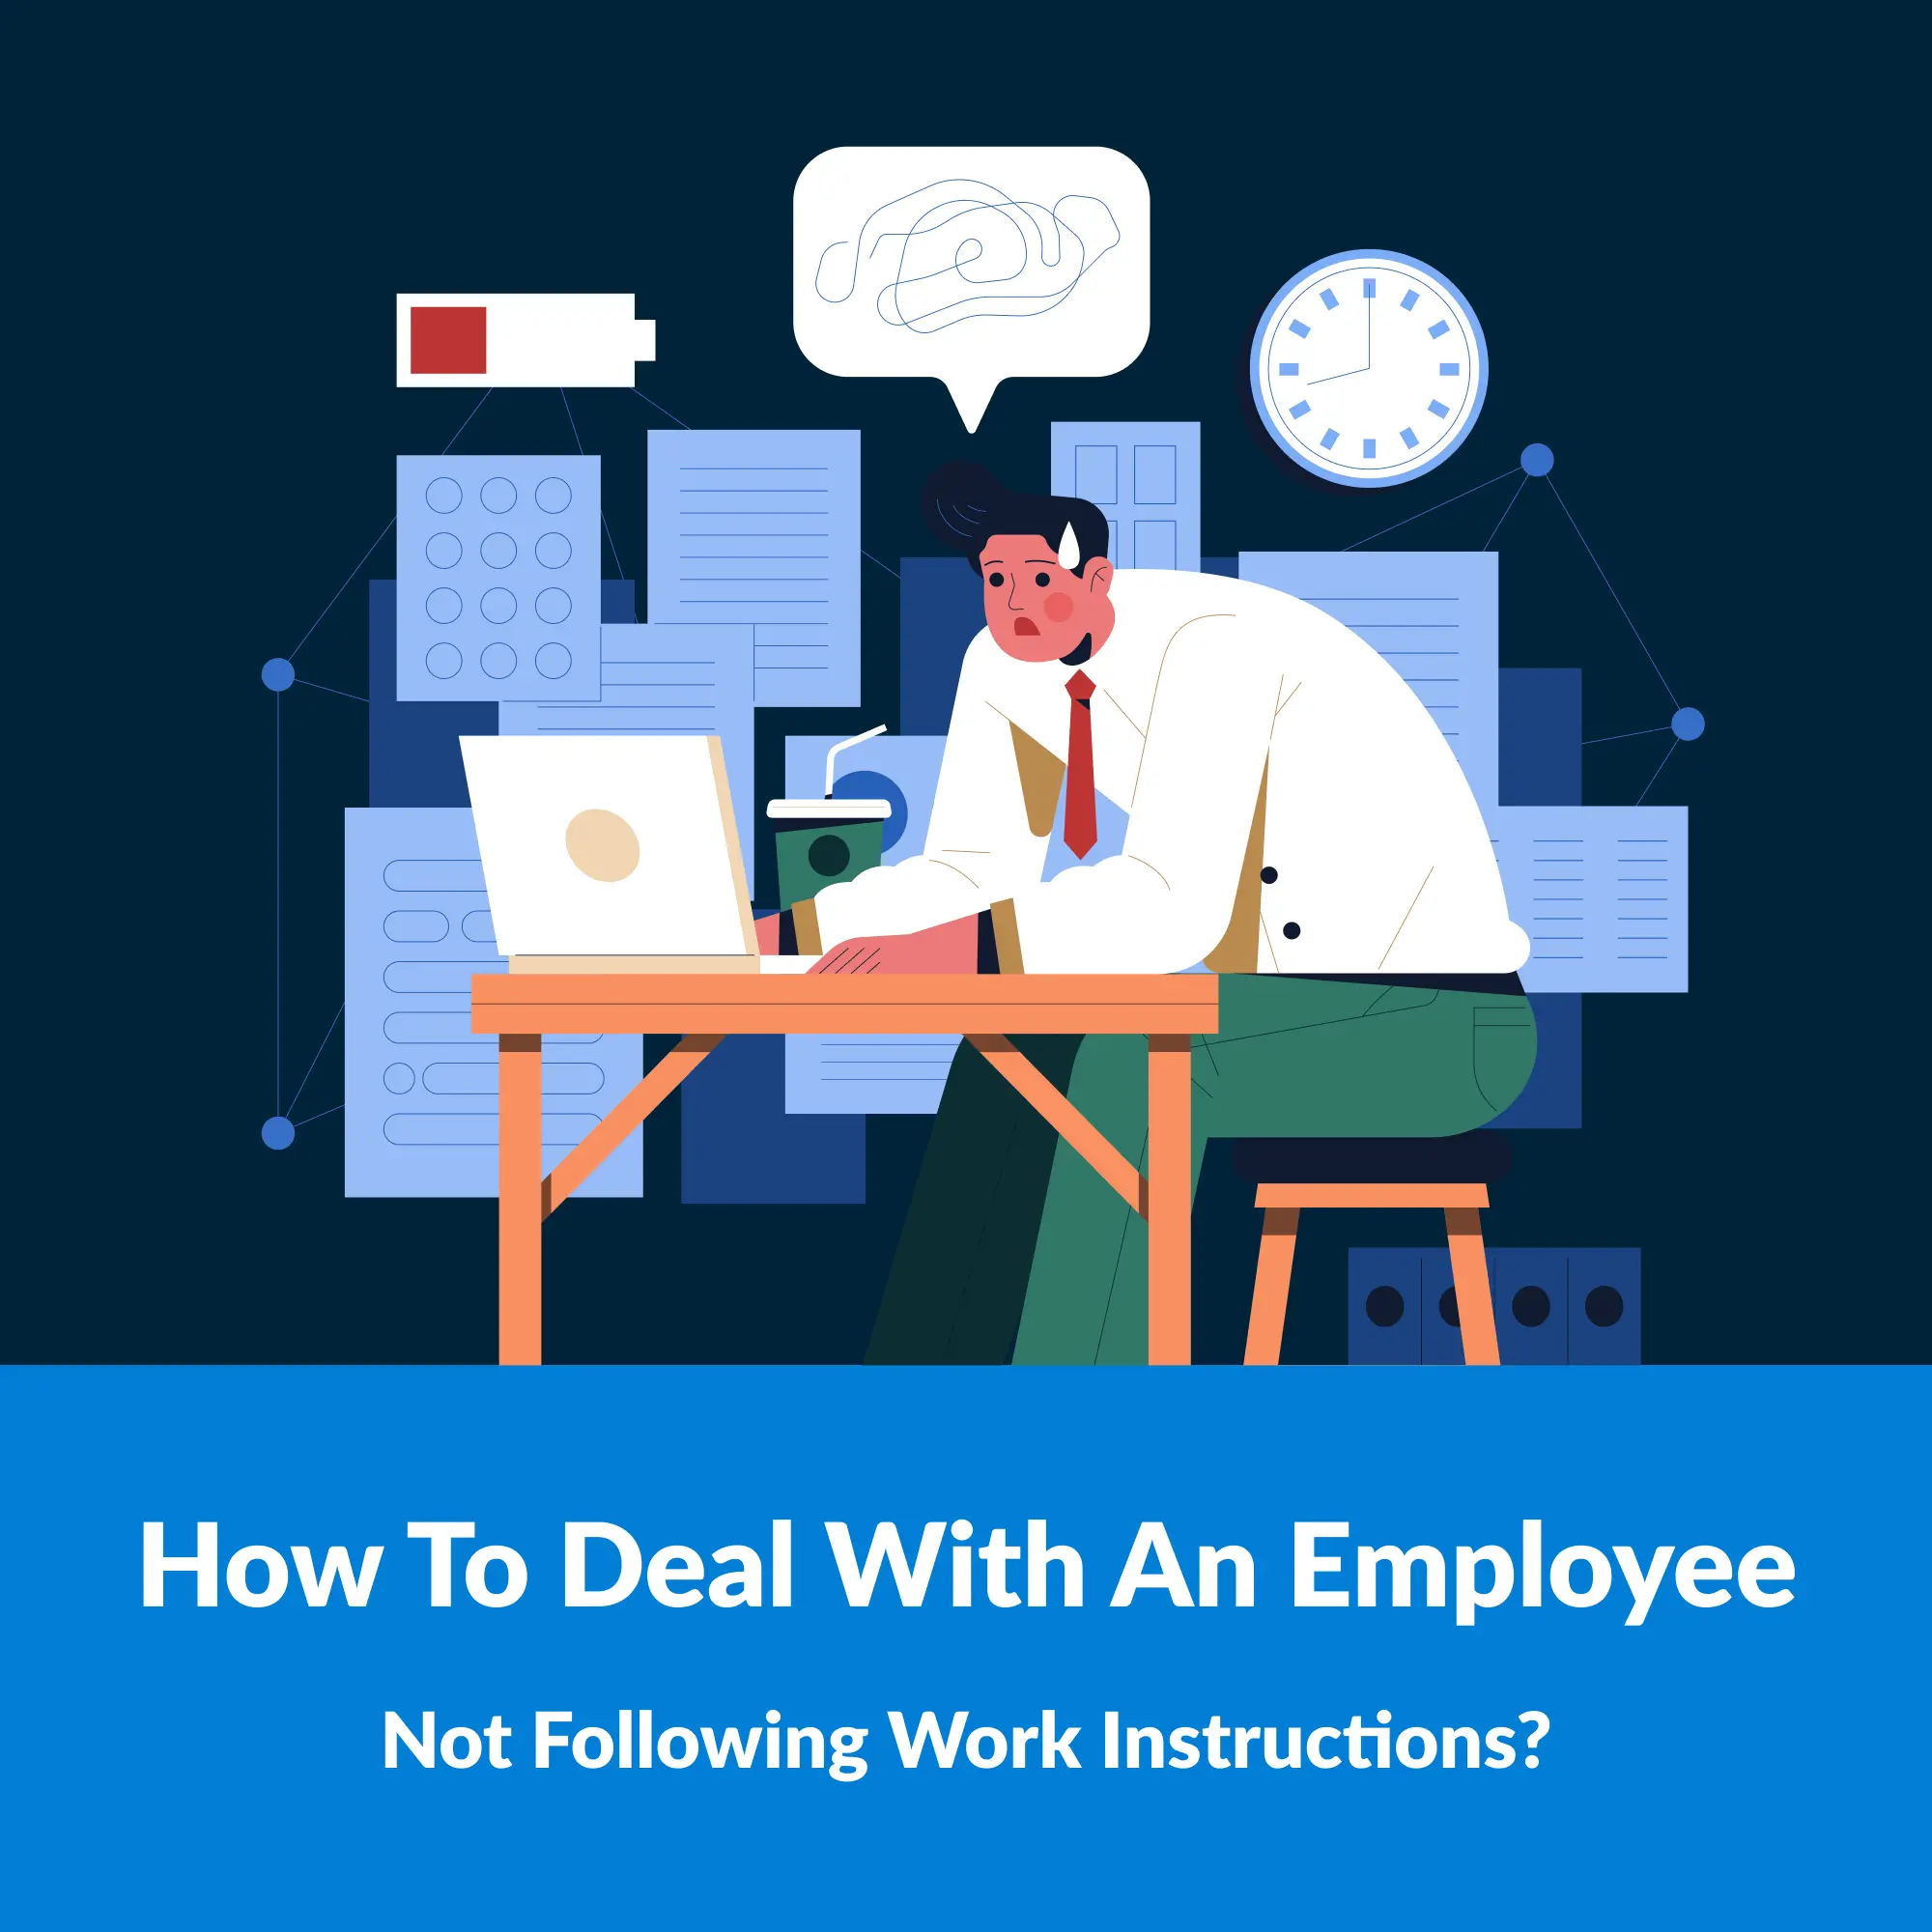 How To Deal With An Employee Not Following Work Instructions